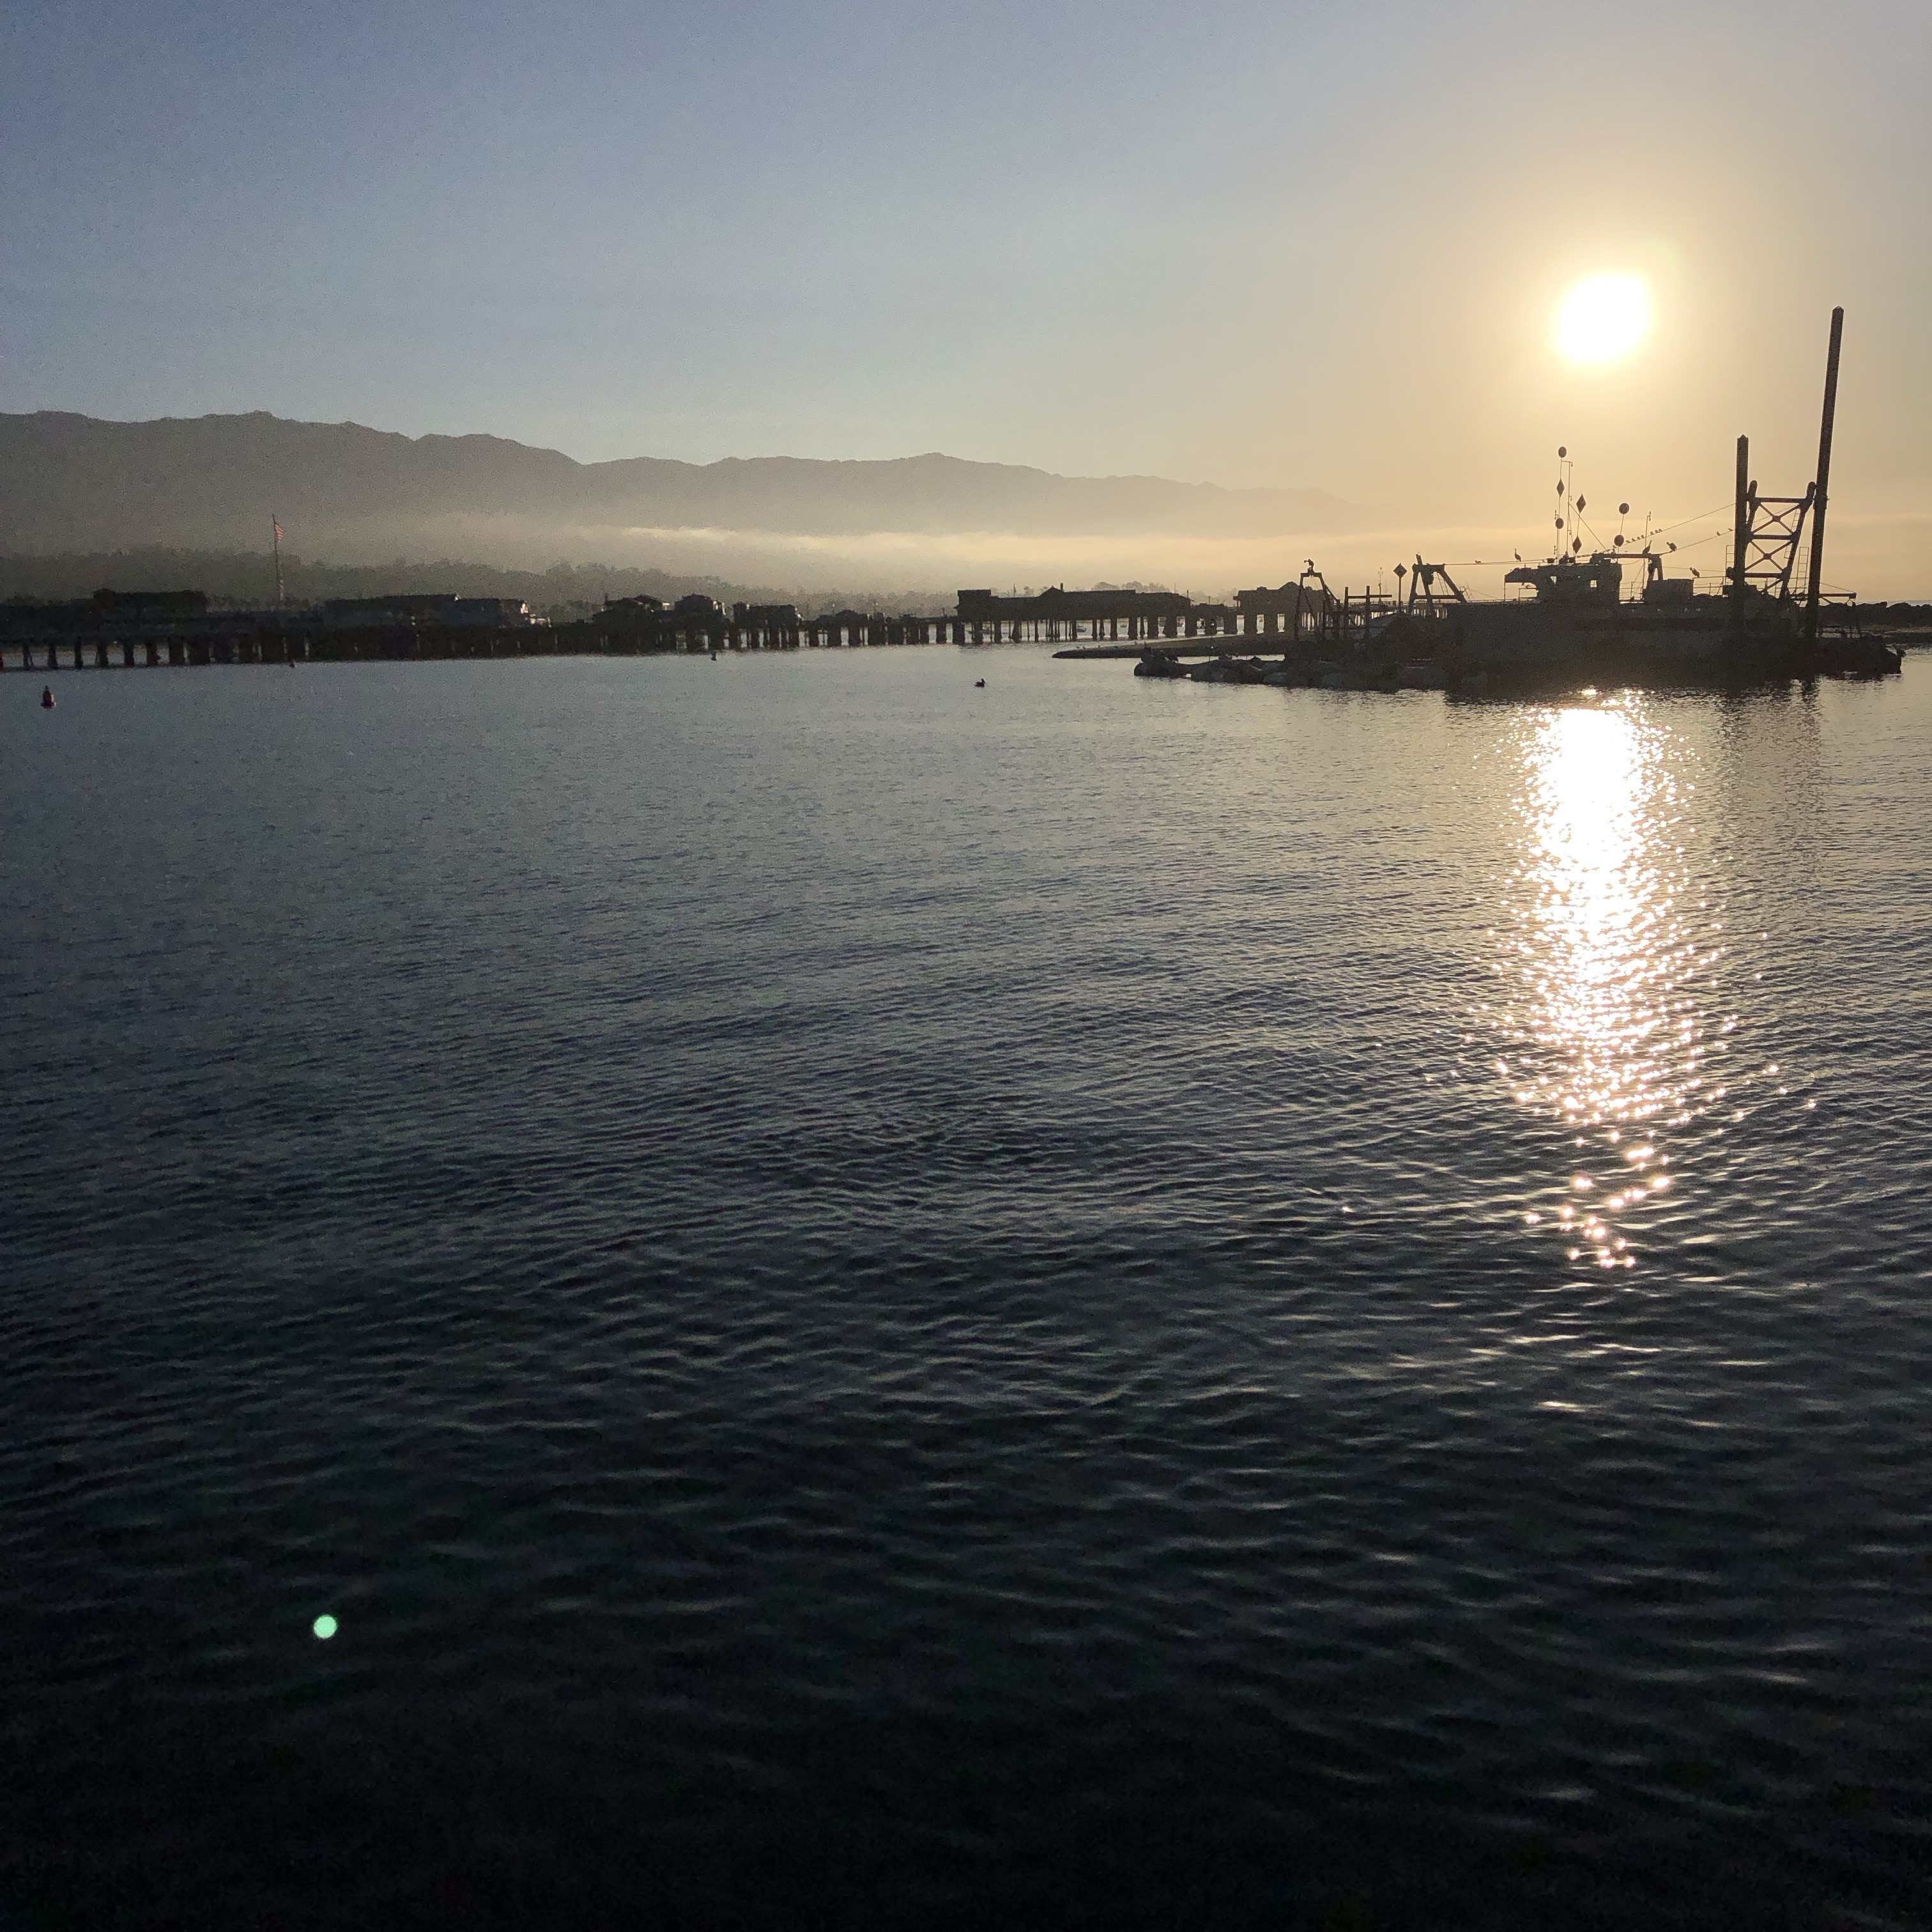 Starting off a great day of fishing with a beautiful #sunrise over the Santa Barbara Harbor #adventure #ocean #California